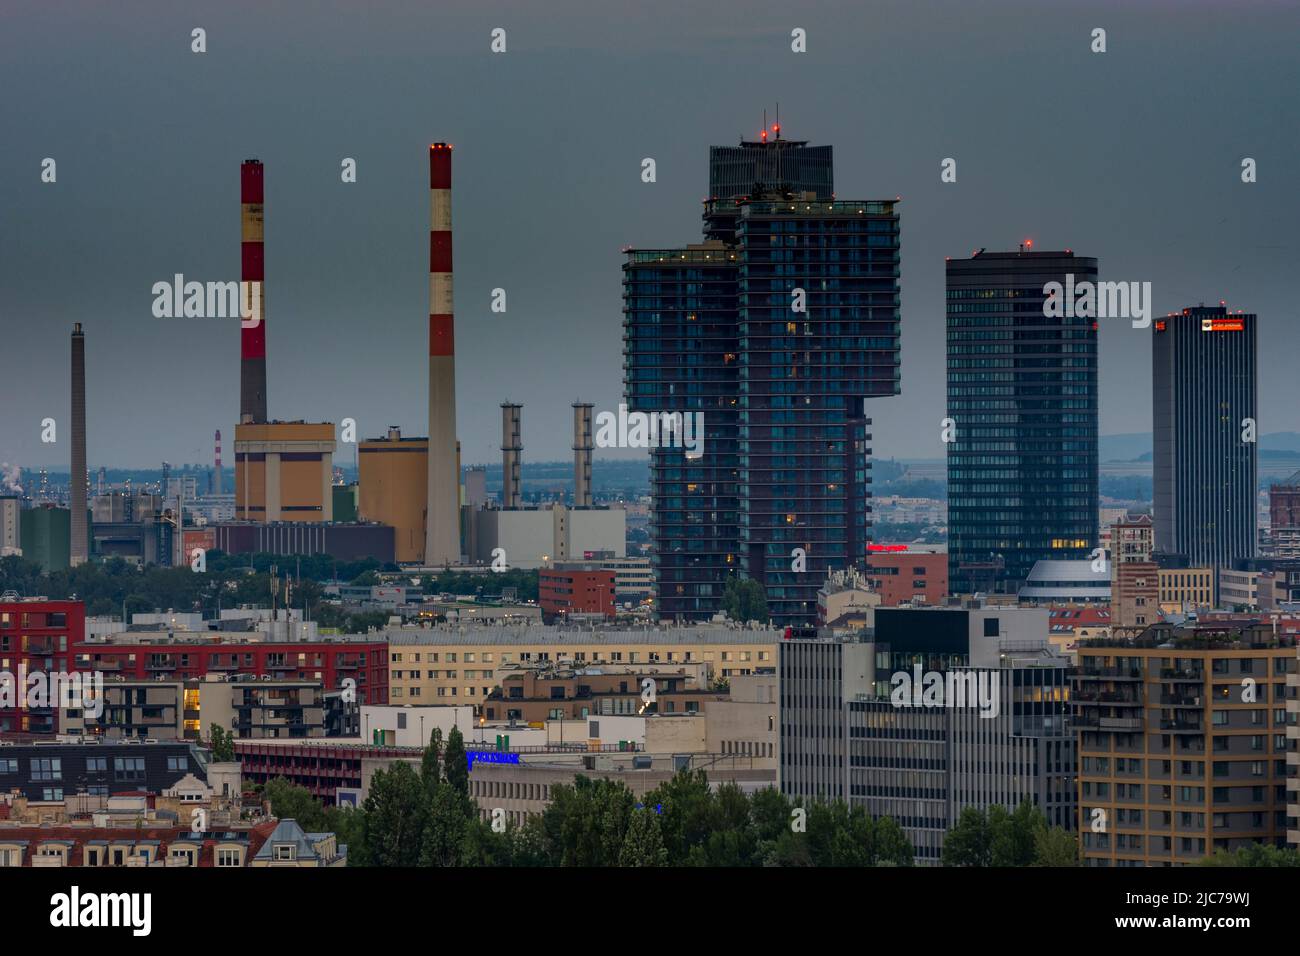 Wien, Vienna: chimneys of power station Simmering, high-rises Triiiple Towers, Orbi Tower, Wiener Stadtwerke corporate headquarters (from left to righ Stock Photo